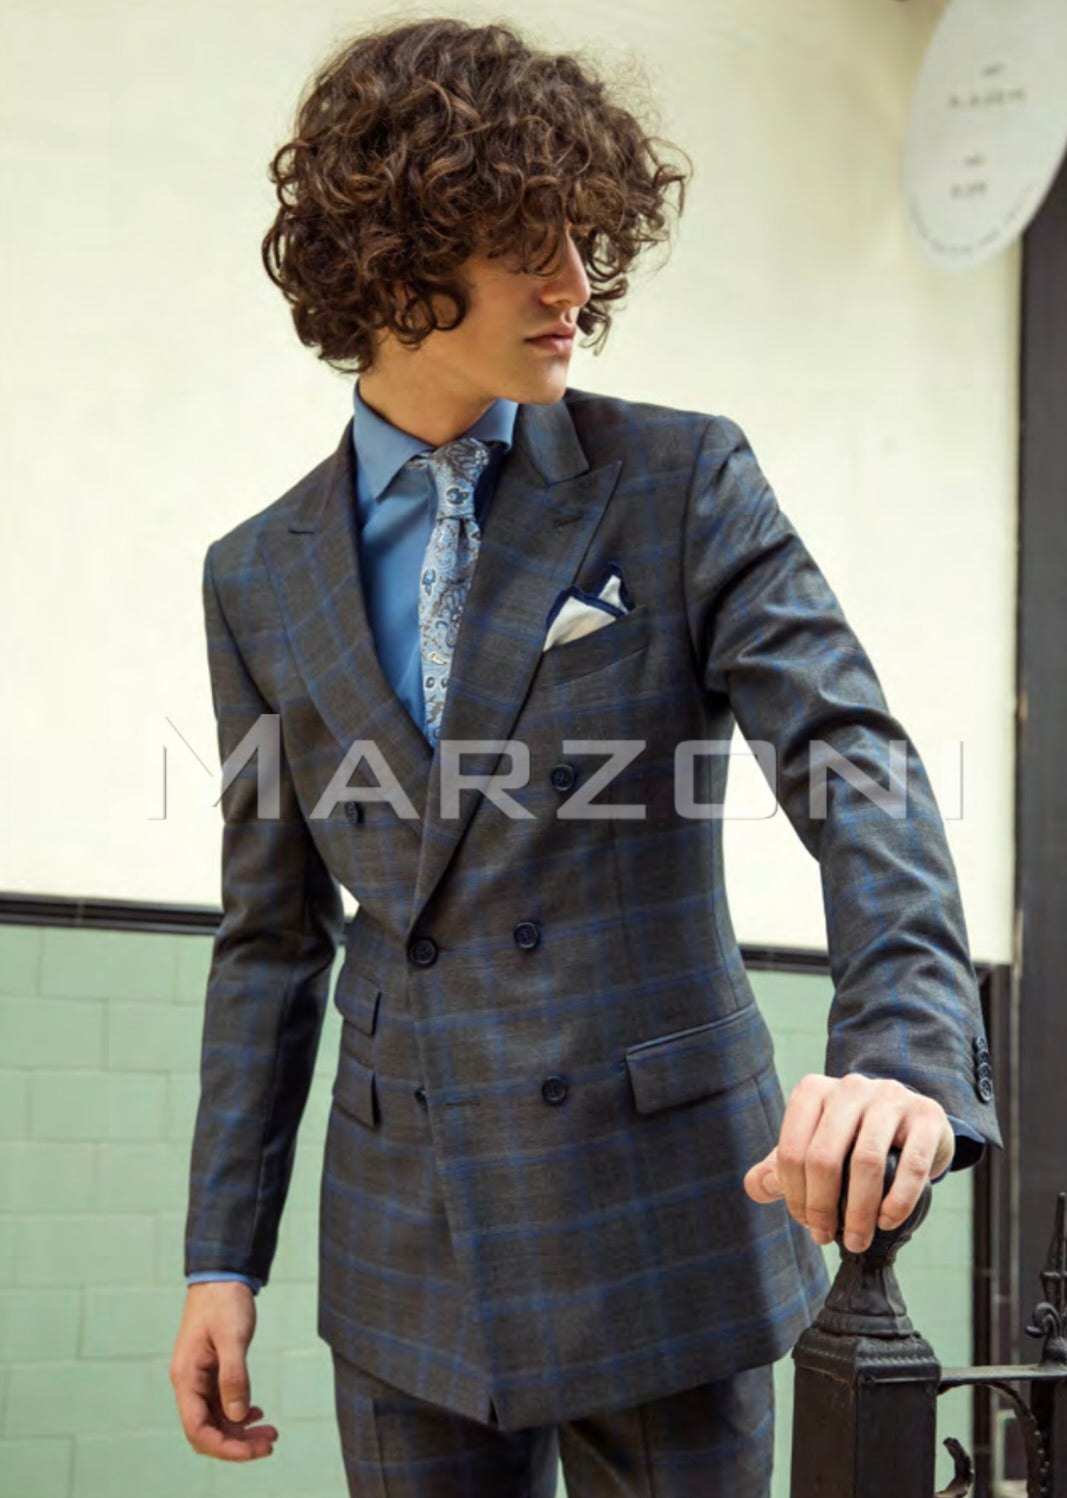 Marzoni Grey and Blue Suit